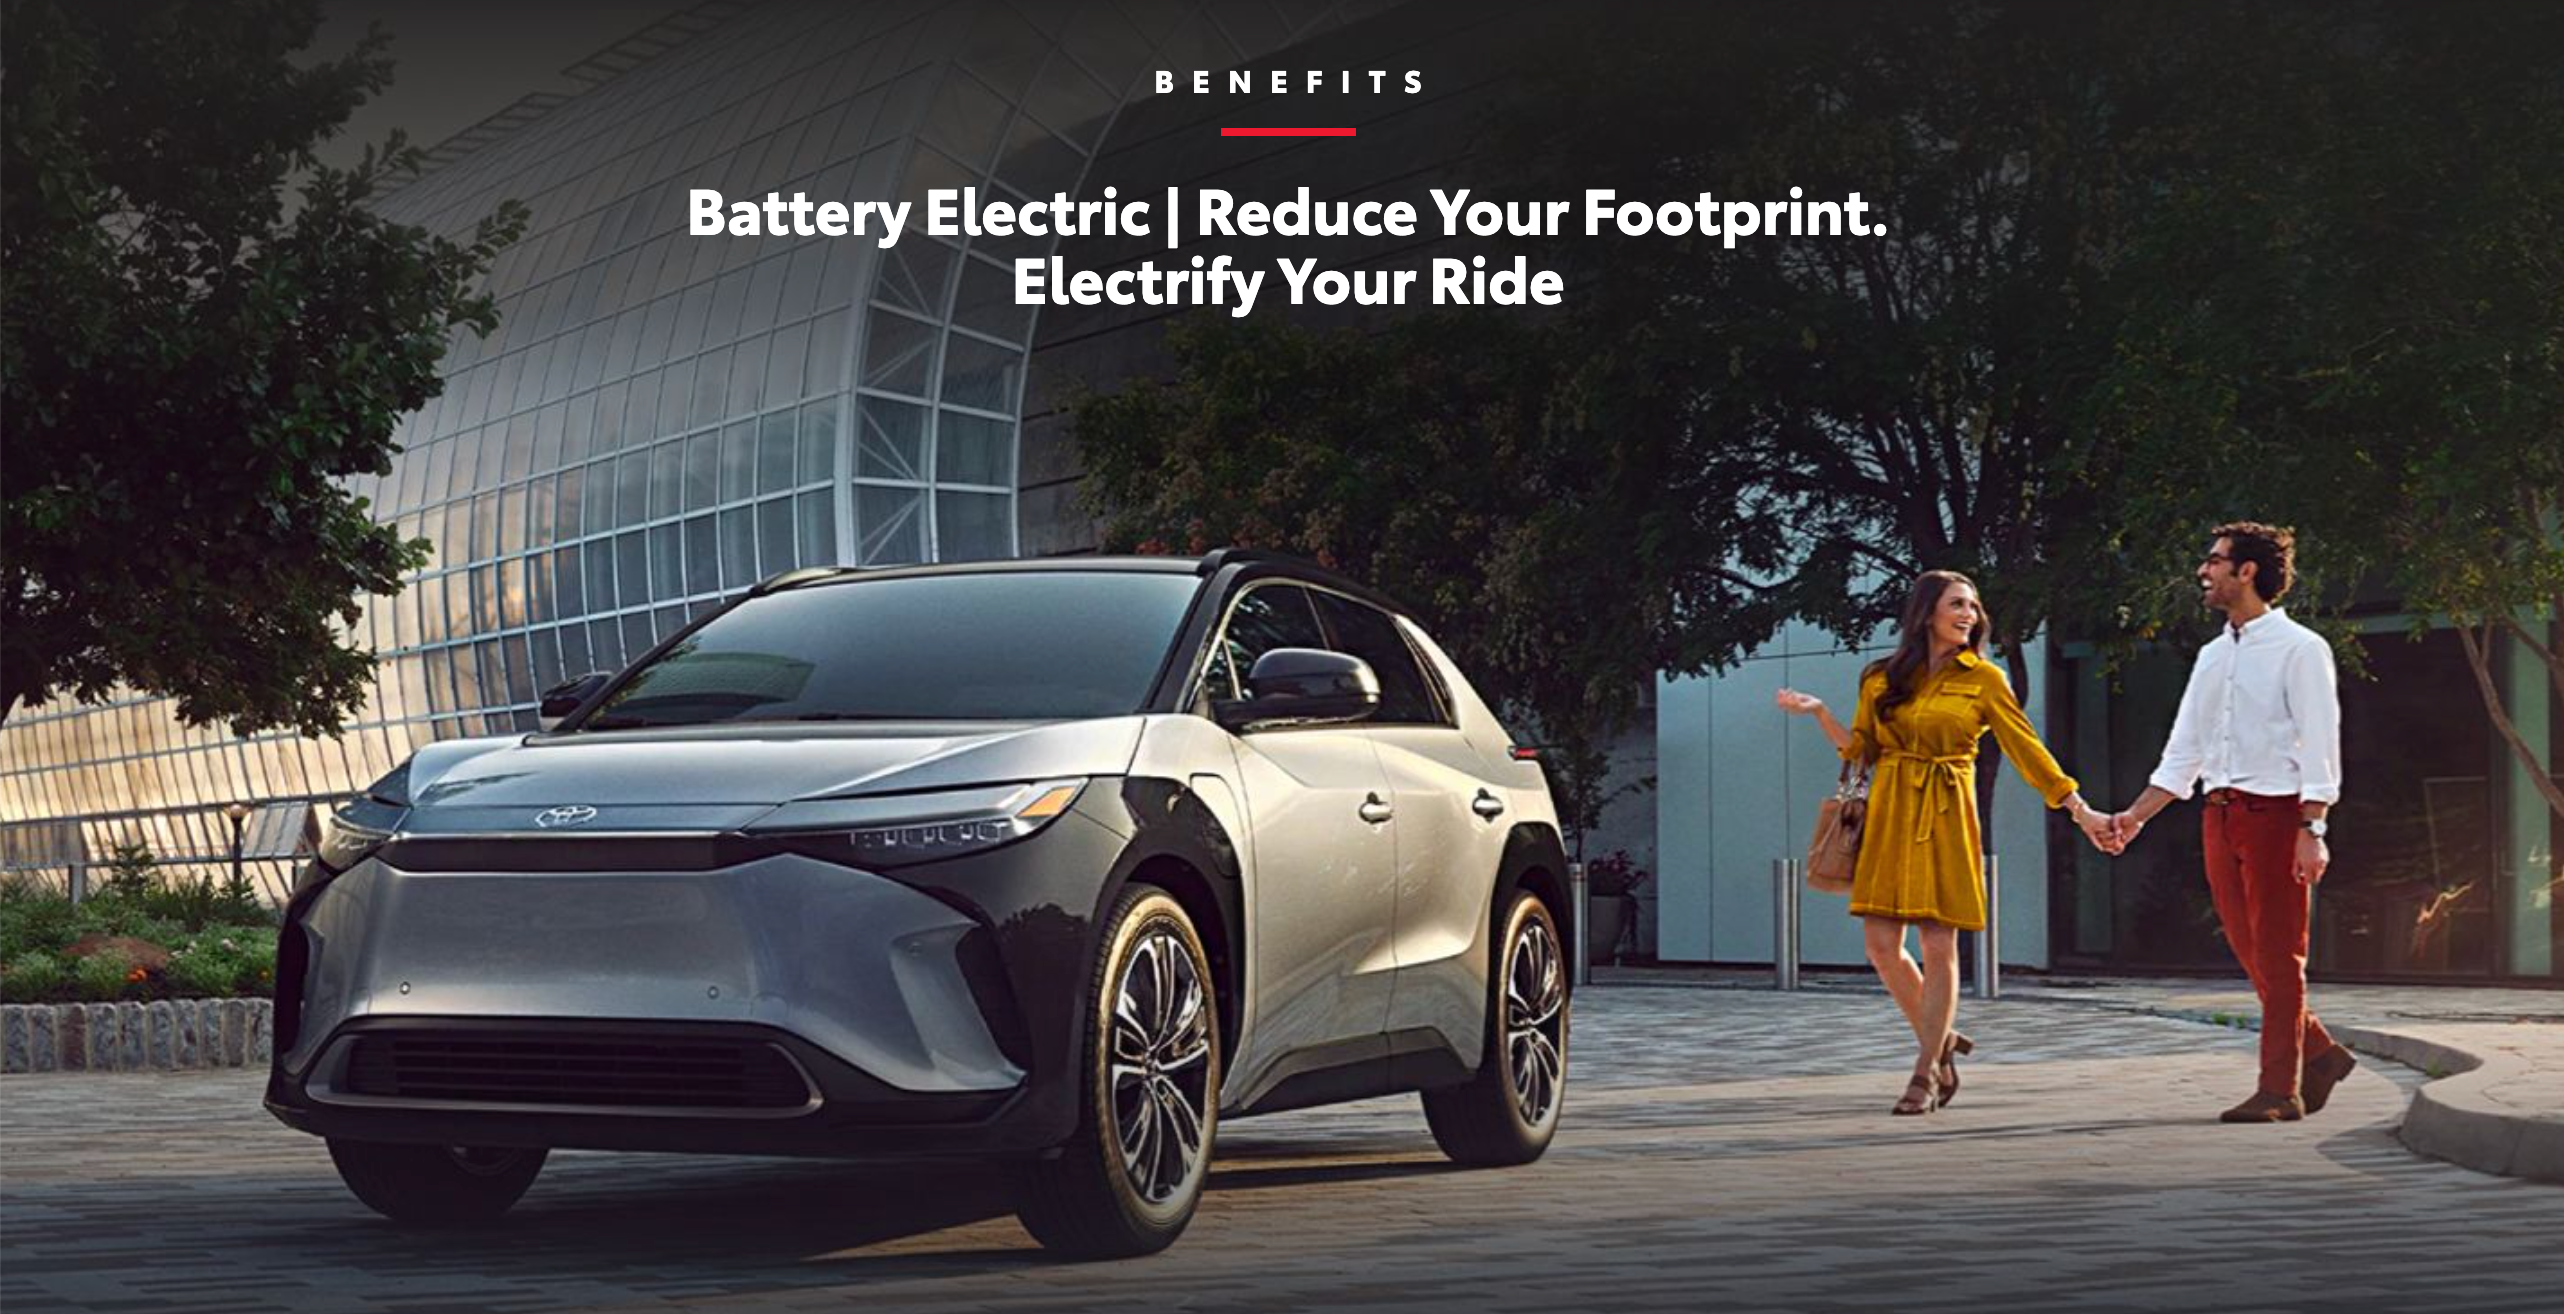 Benefits of Battery Electric | Reduce Your Footprint, Electrify your Ride. A couple holding hands walking towards their electric Toyota.